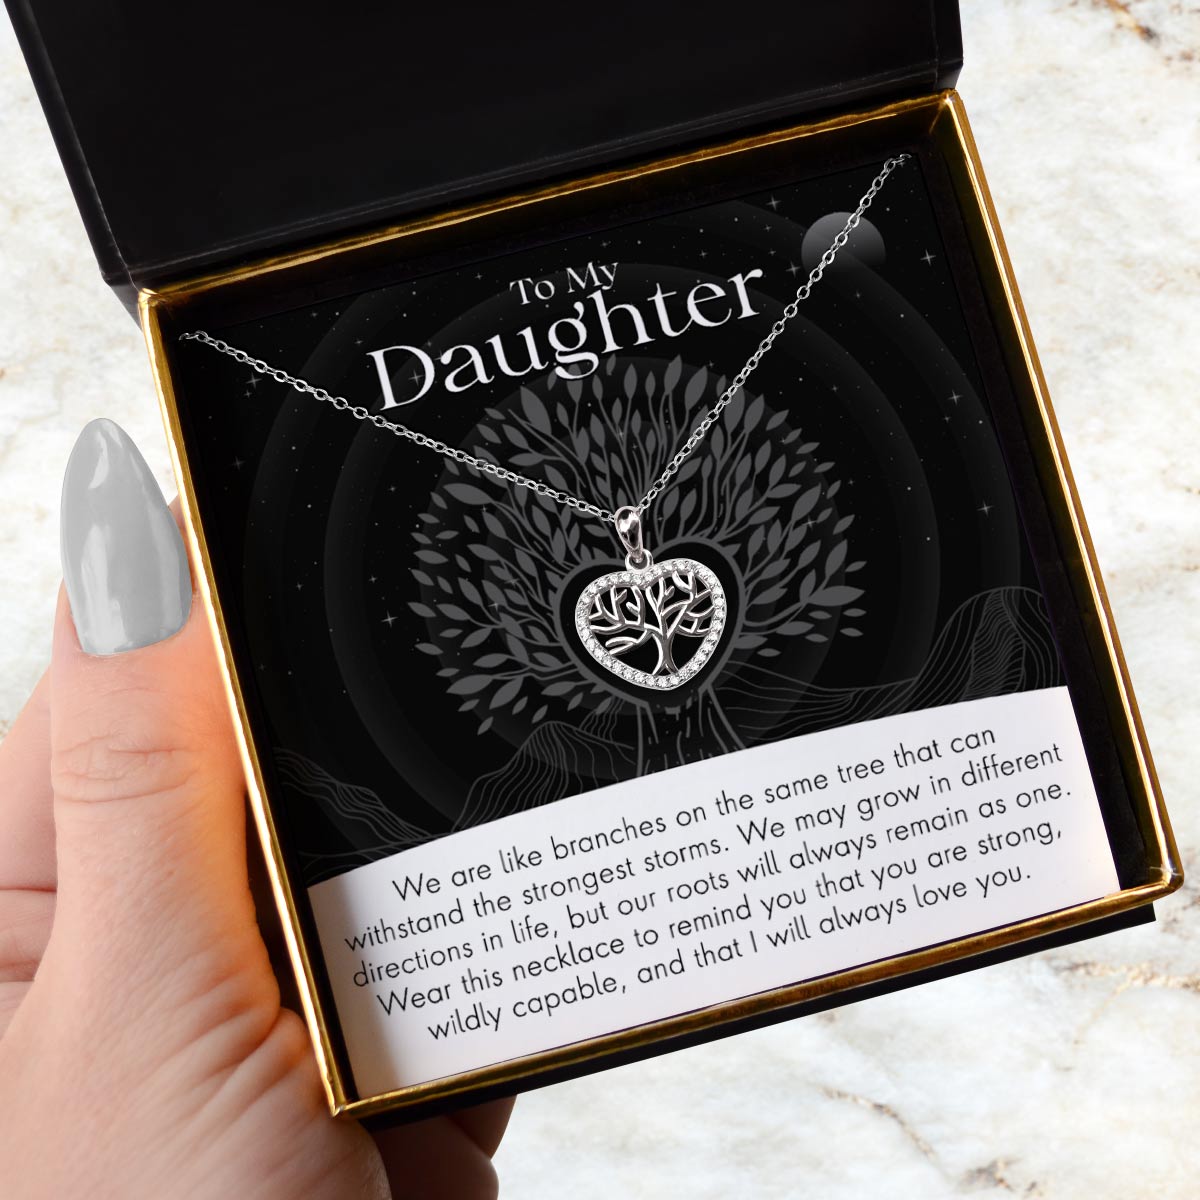 To My Daughter, Strong Roots - Tree of Life Mini Heart Pendant Necklace Gift Set